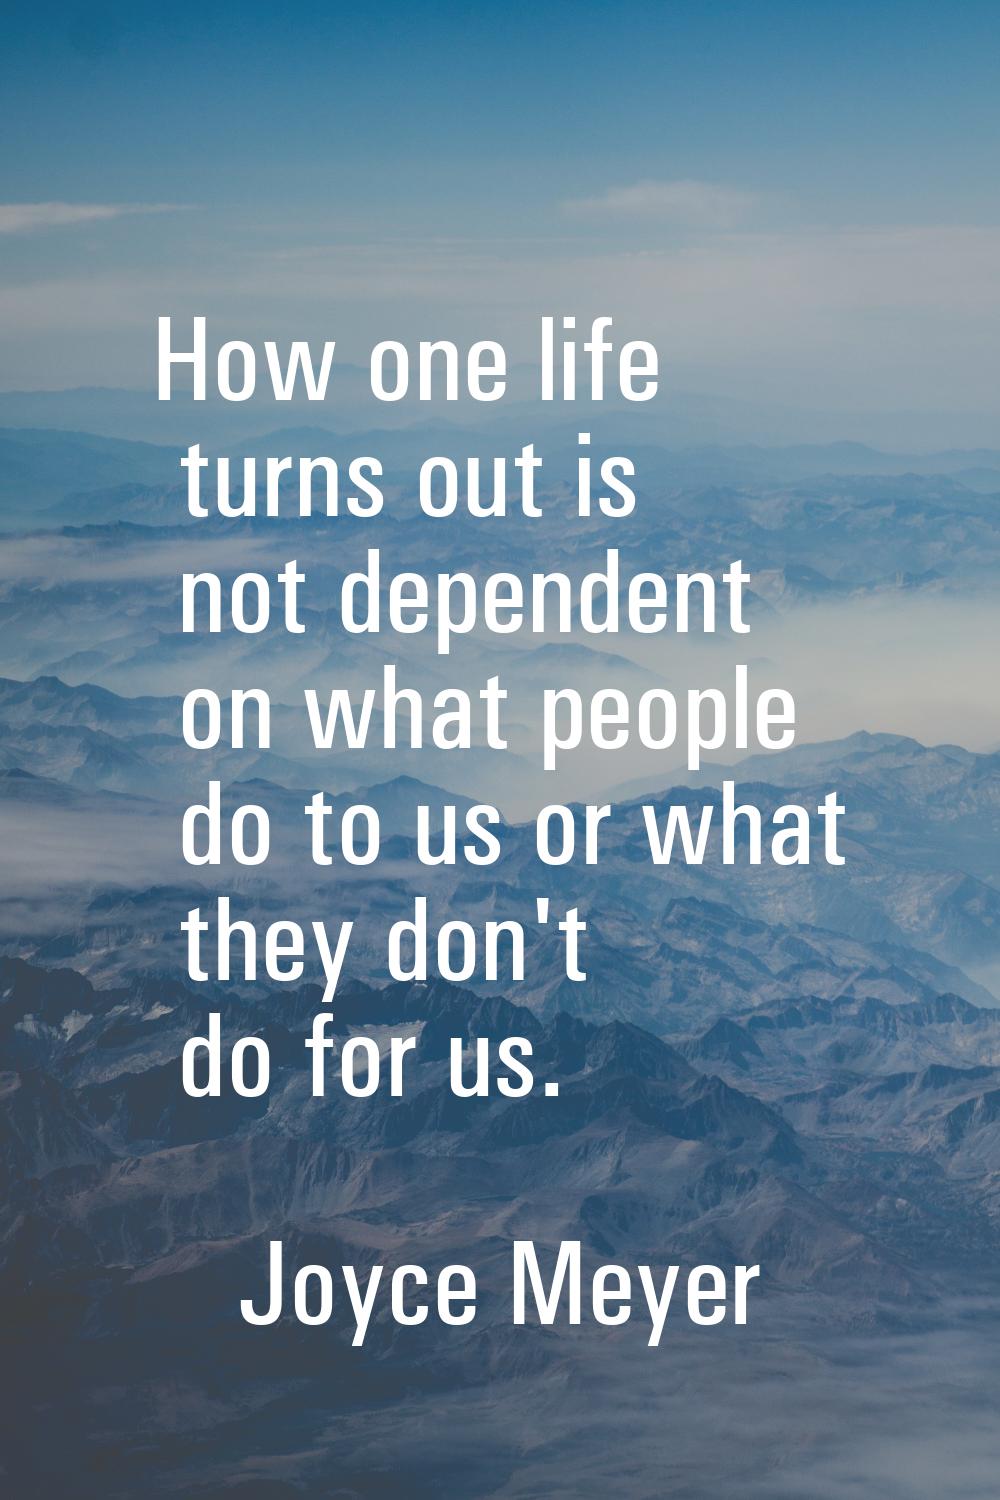 How one life turns out is not dependent on what people do to us or what they don't do for us.